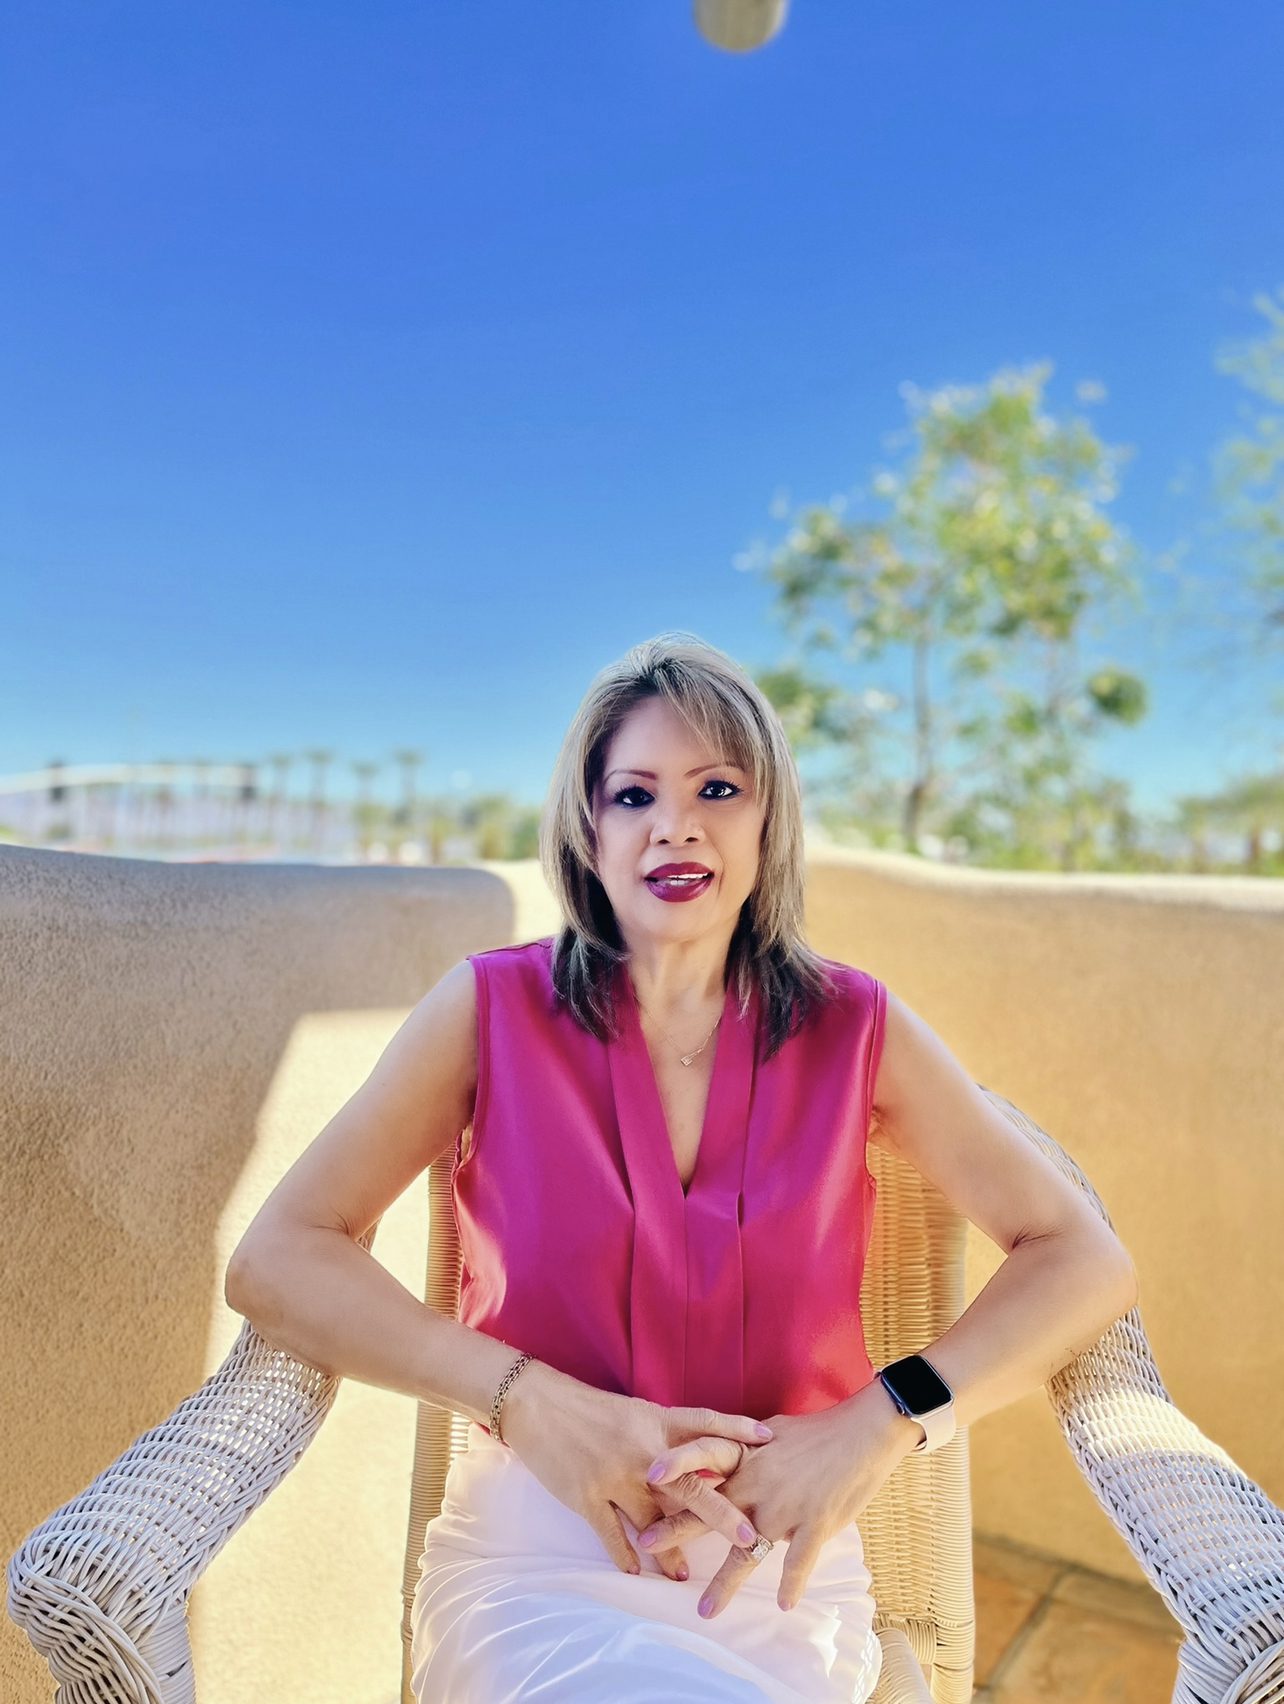 A woman with short hair wearing a sleeveless pink top and white pants sitting on a chair outdoors with a clear sky in the background.